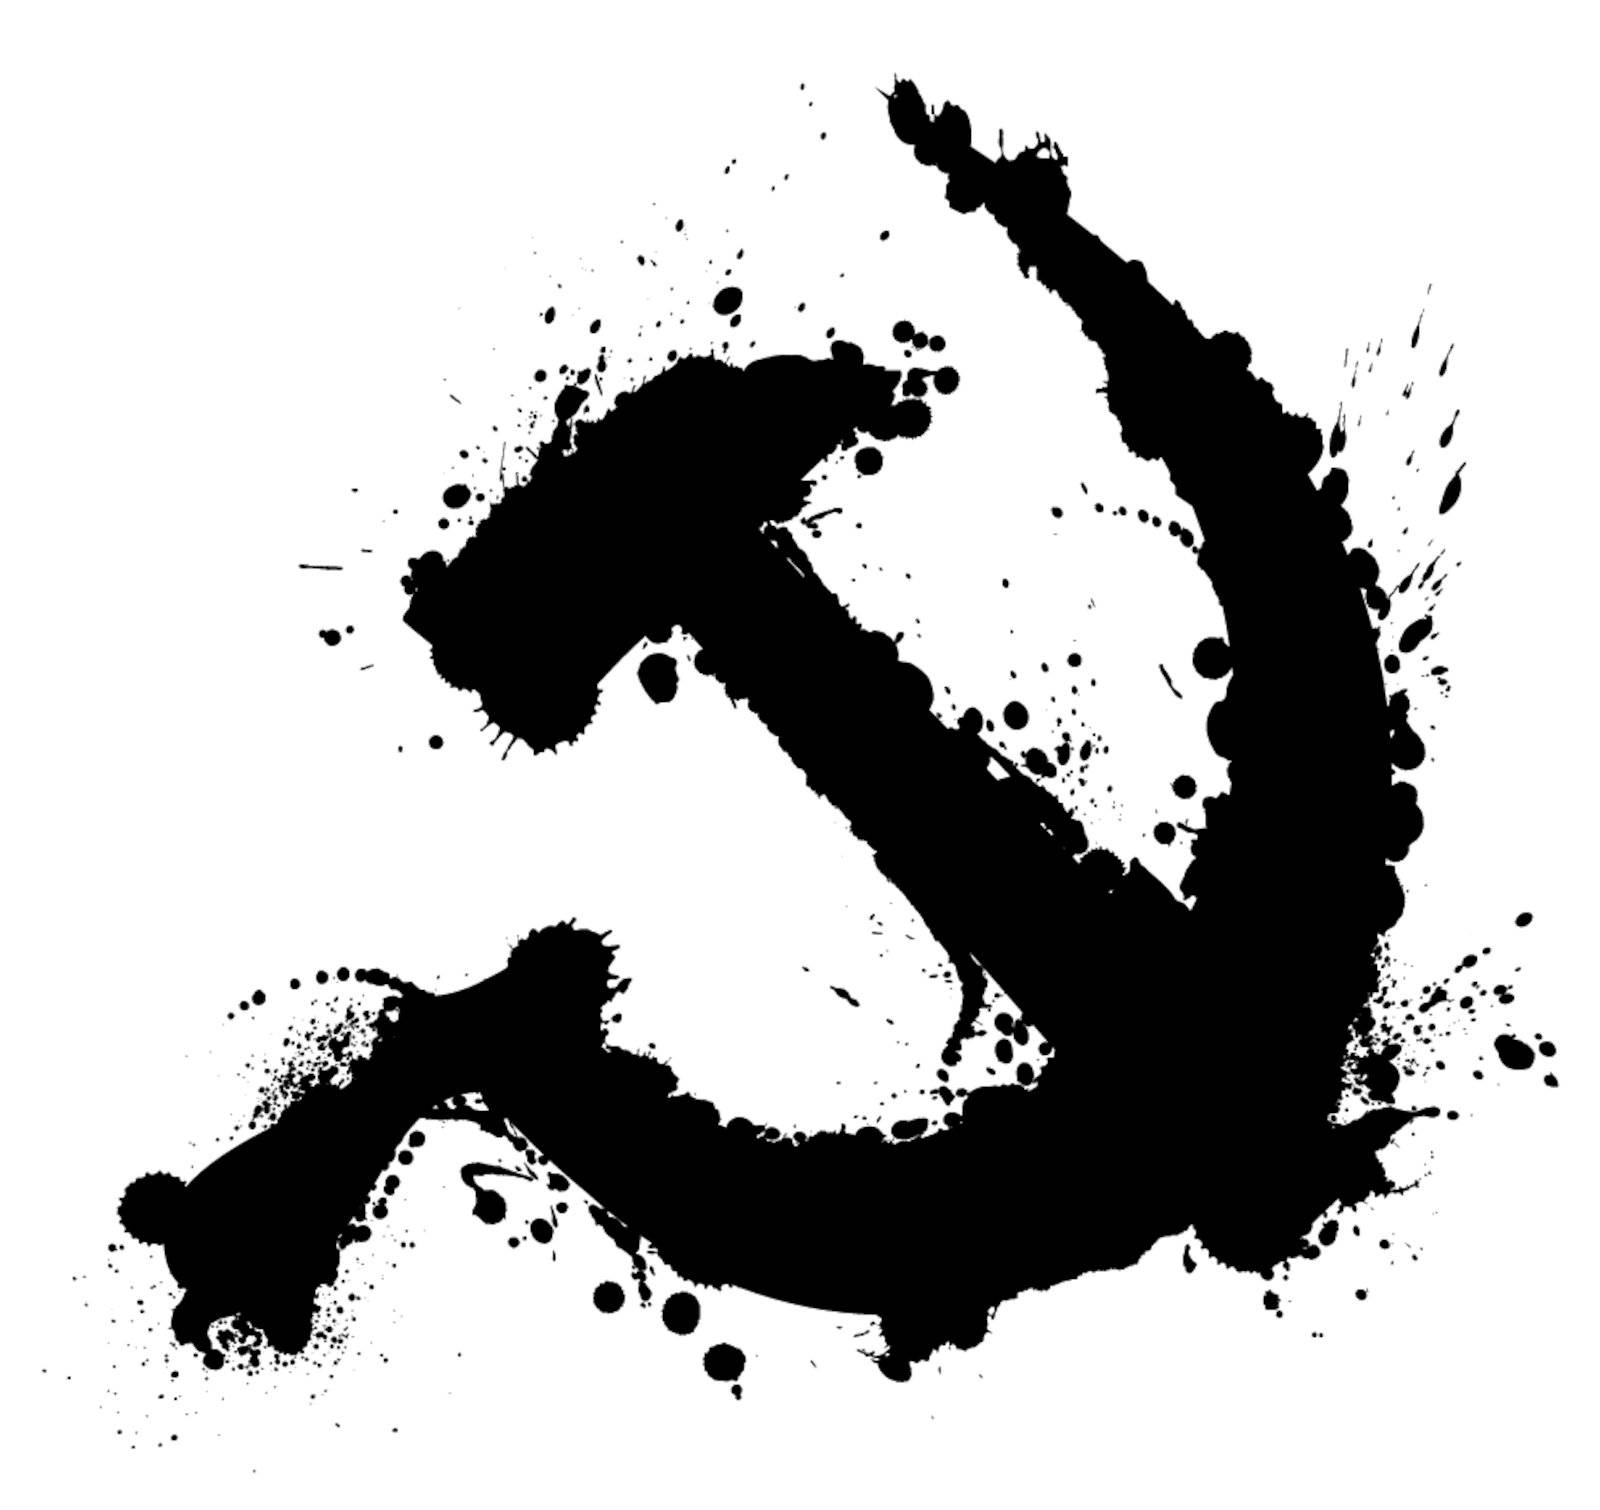 Hammer and sickle splatter element by domencolja